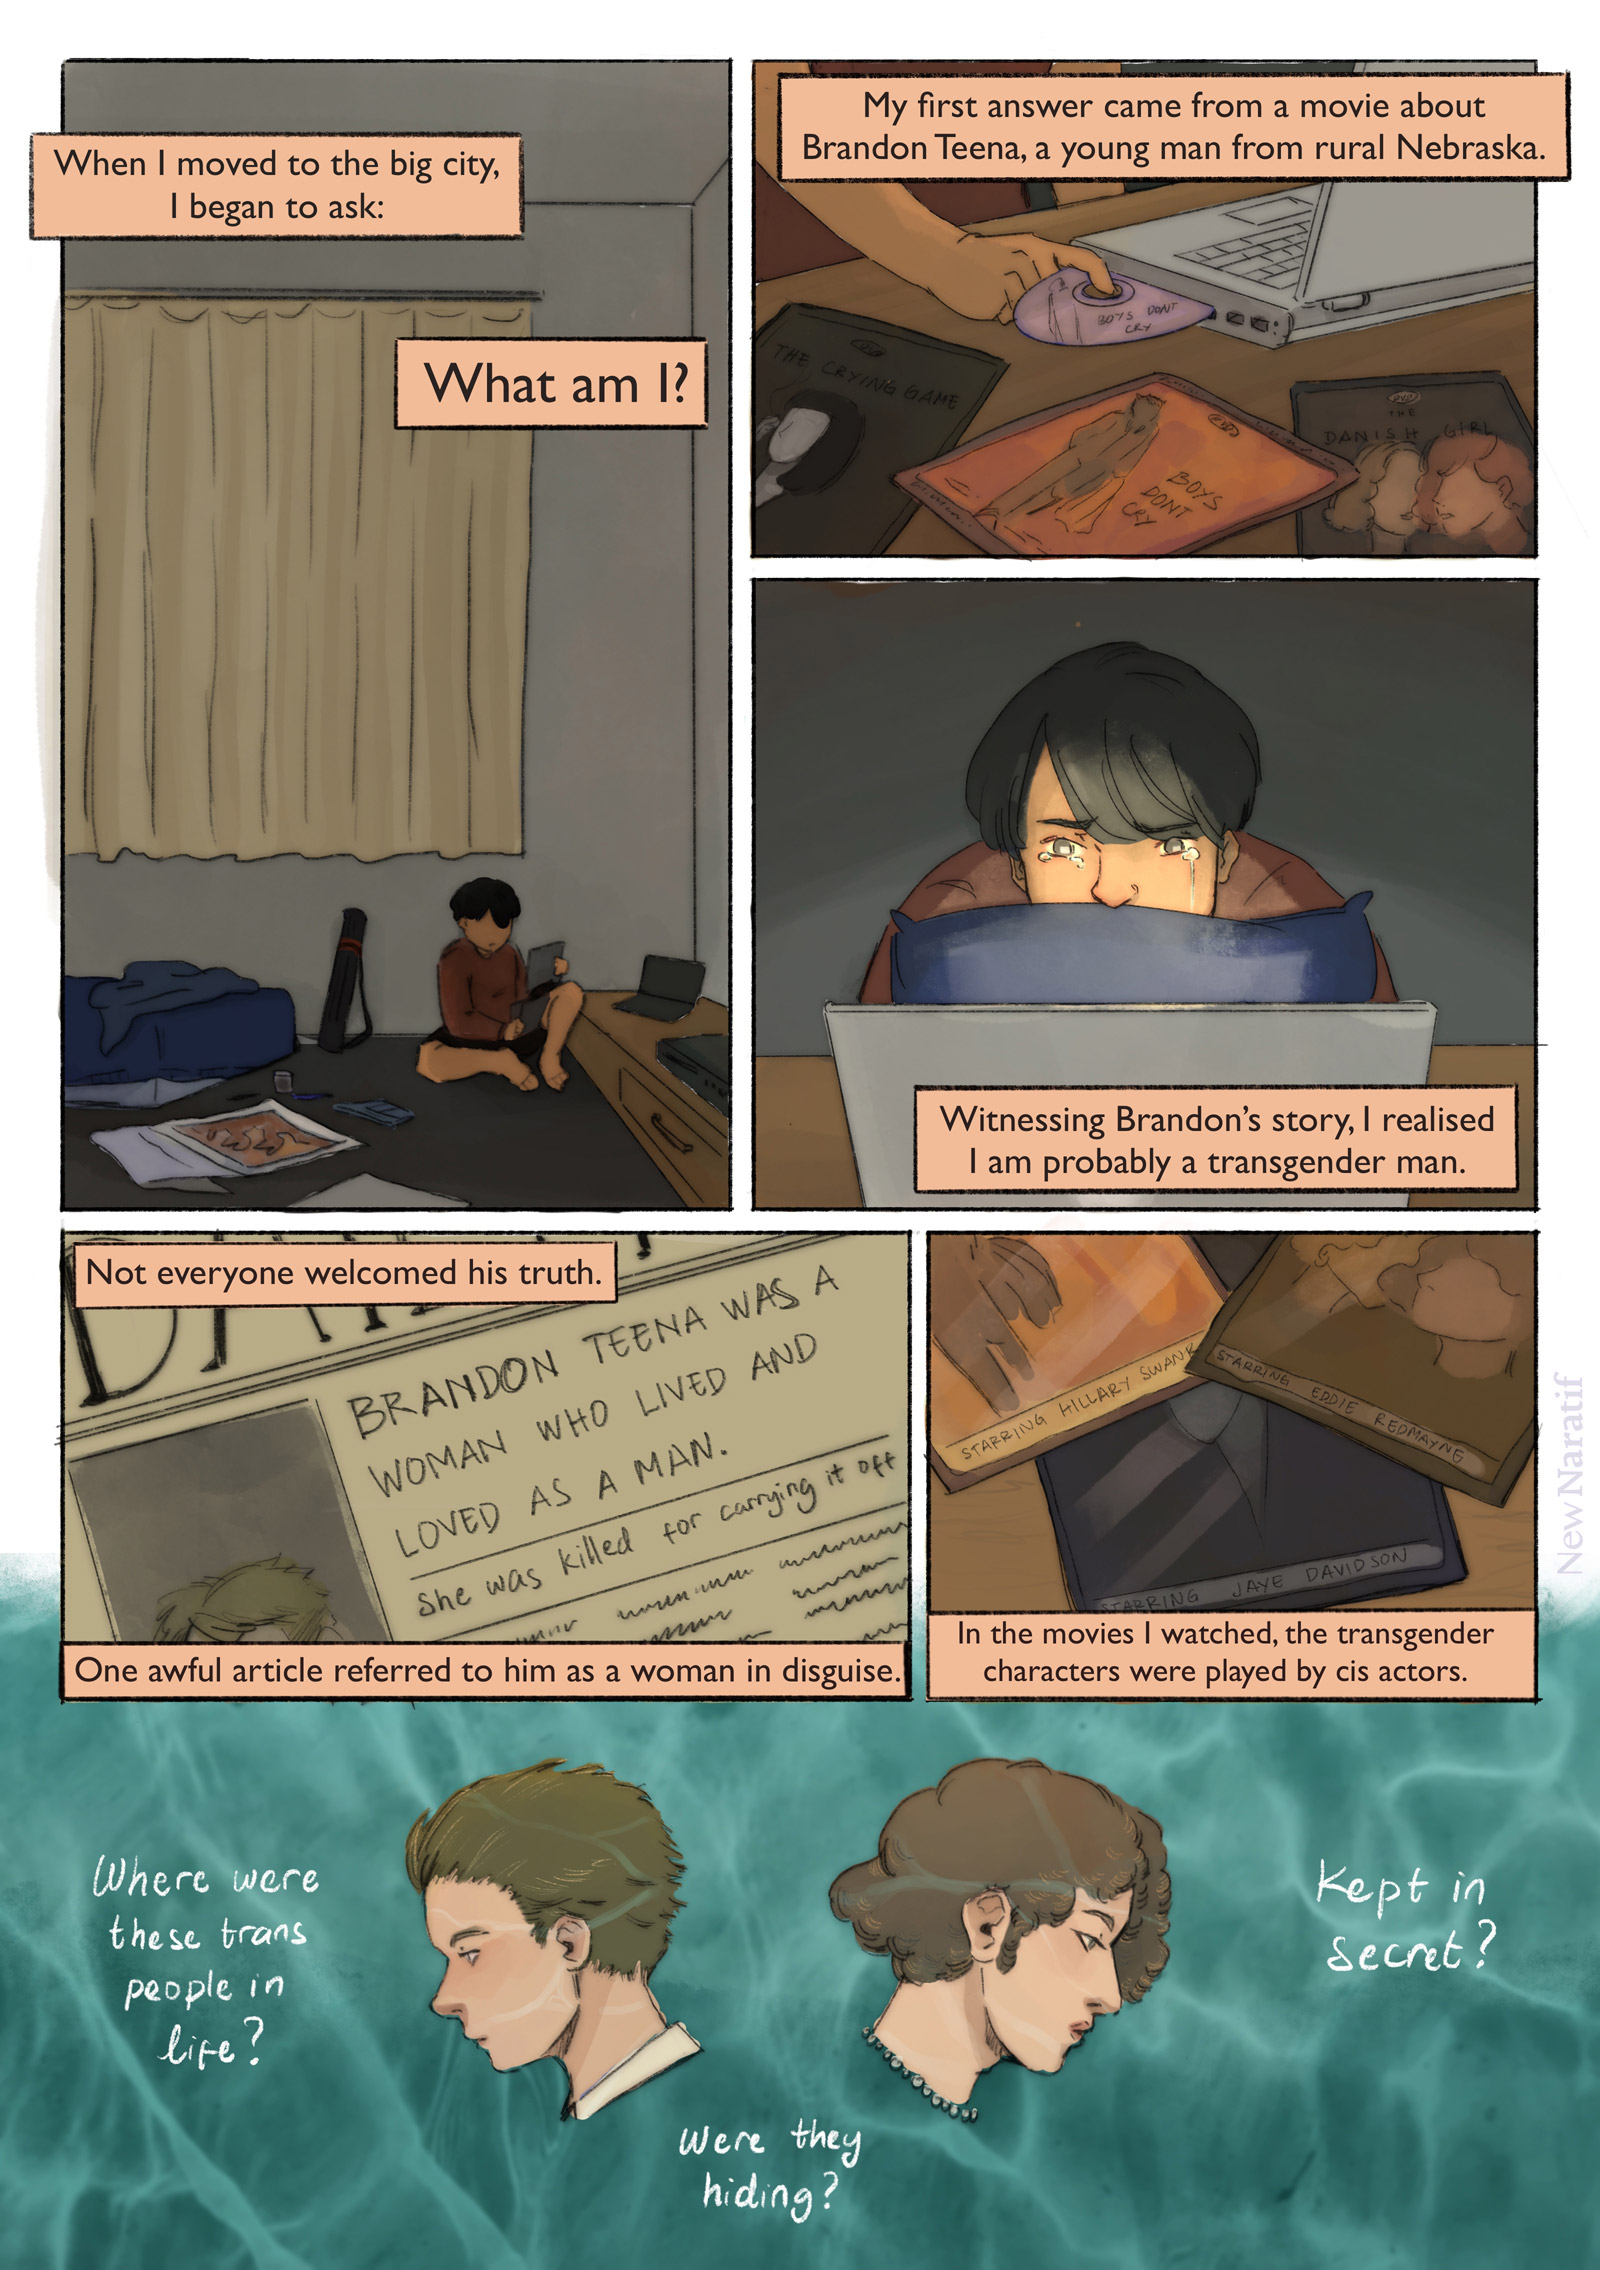 Page 2.
A comic page of 6 panels in black lines and full colour. The narration is provided in caption boxes.
Panel 1. The main character is now an art student who presents himself as a transmasculine person. He has a drawing tube in his room and a few drawing tools scattered on the floor. He sits on the floor, holding some pirated DVDs. Narrator: When I moved to the big city, I began to ask: “What am I?”
Panel 2. Close-up on the pirated DVDs. The covers show artwork for “Boys Don’t Cry”, “The Danish Girl”, and “The Crying Game”. He inserts “Boys Don’t Cry” into the DVD drive on this laptop. Narrator: My first answer came from a movie about Brandon Teena, a young man from rural Nebraska.
Panel 3. He cries as he watches the movie. Narrator: Witnessing Brandon’s story, I realised I am probably a transgender man.
Panel 4. A newspaper frontpage with the headline: “Brandon Teena was a woman who lived and loved as a man. She was killed for carrying it off". Narrator: Not everyone welcomed his truth. One awful article referred to him as a woman in disguise.
Panel 5. Close-up on the DVD covers, showing the cast names. Narrator: In the movies I watched, the transgender characters were played by cis actors.
Panel 6. Portraits of Brandon Teena and Lili Elbe, set in front of an aquamarine background. Narrator: Where were these trans people in real life? Were they hiding? Kept away in secret?